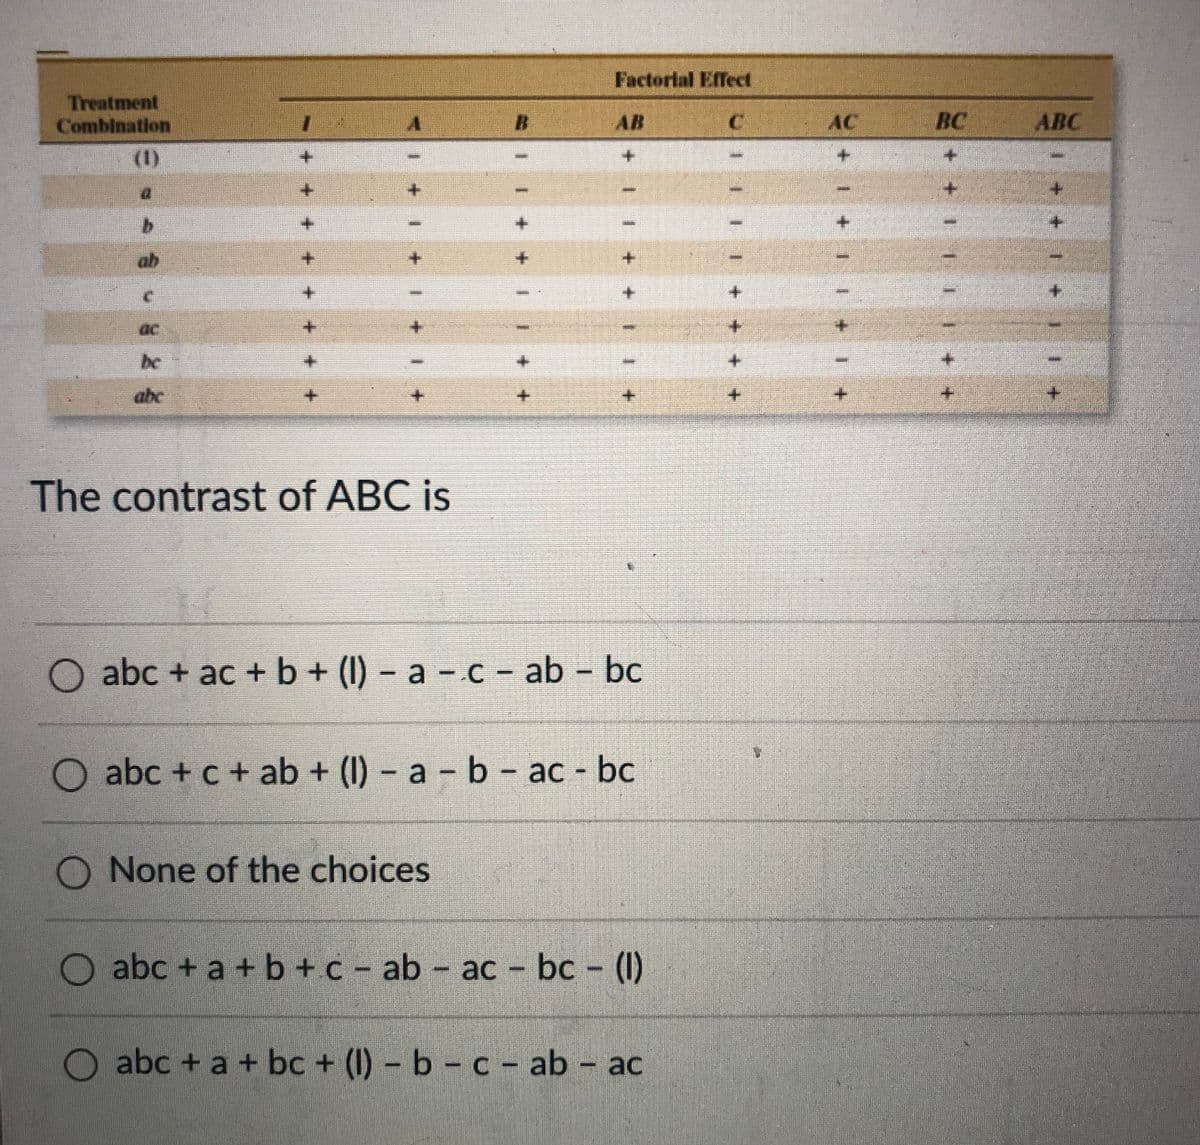 Factorial Effect
Treatment
Combination
AB
AC
BC
ABC
(1)
ab
ac
+.
be
abc
The contrast of ABC is
O abc + ac + b+ (1) – a - c - ab - bc
abc + c + ab + (I) – a - b ac - bc
O None of the choices
O abc + a + b +c - ab ac bc (1)
%3D
Oabc + a + bc + (I) - b- c- ab ac
11 11+
+ 1+1 1+ 1
+.
1 1+ + t1 +
1 + 1+ 1 +1 +
